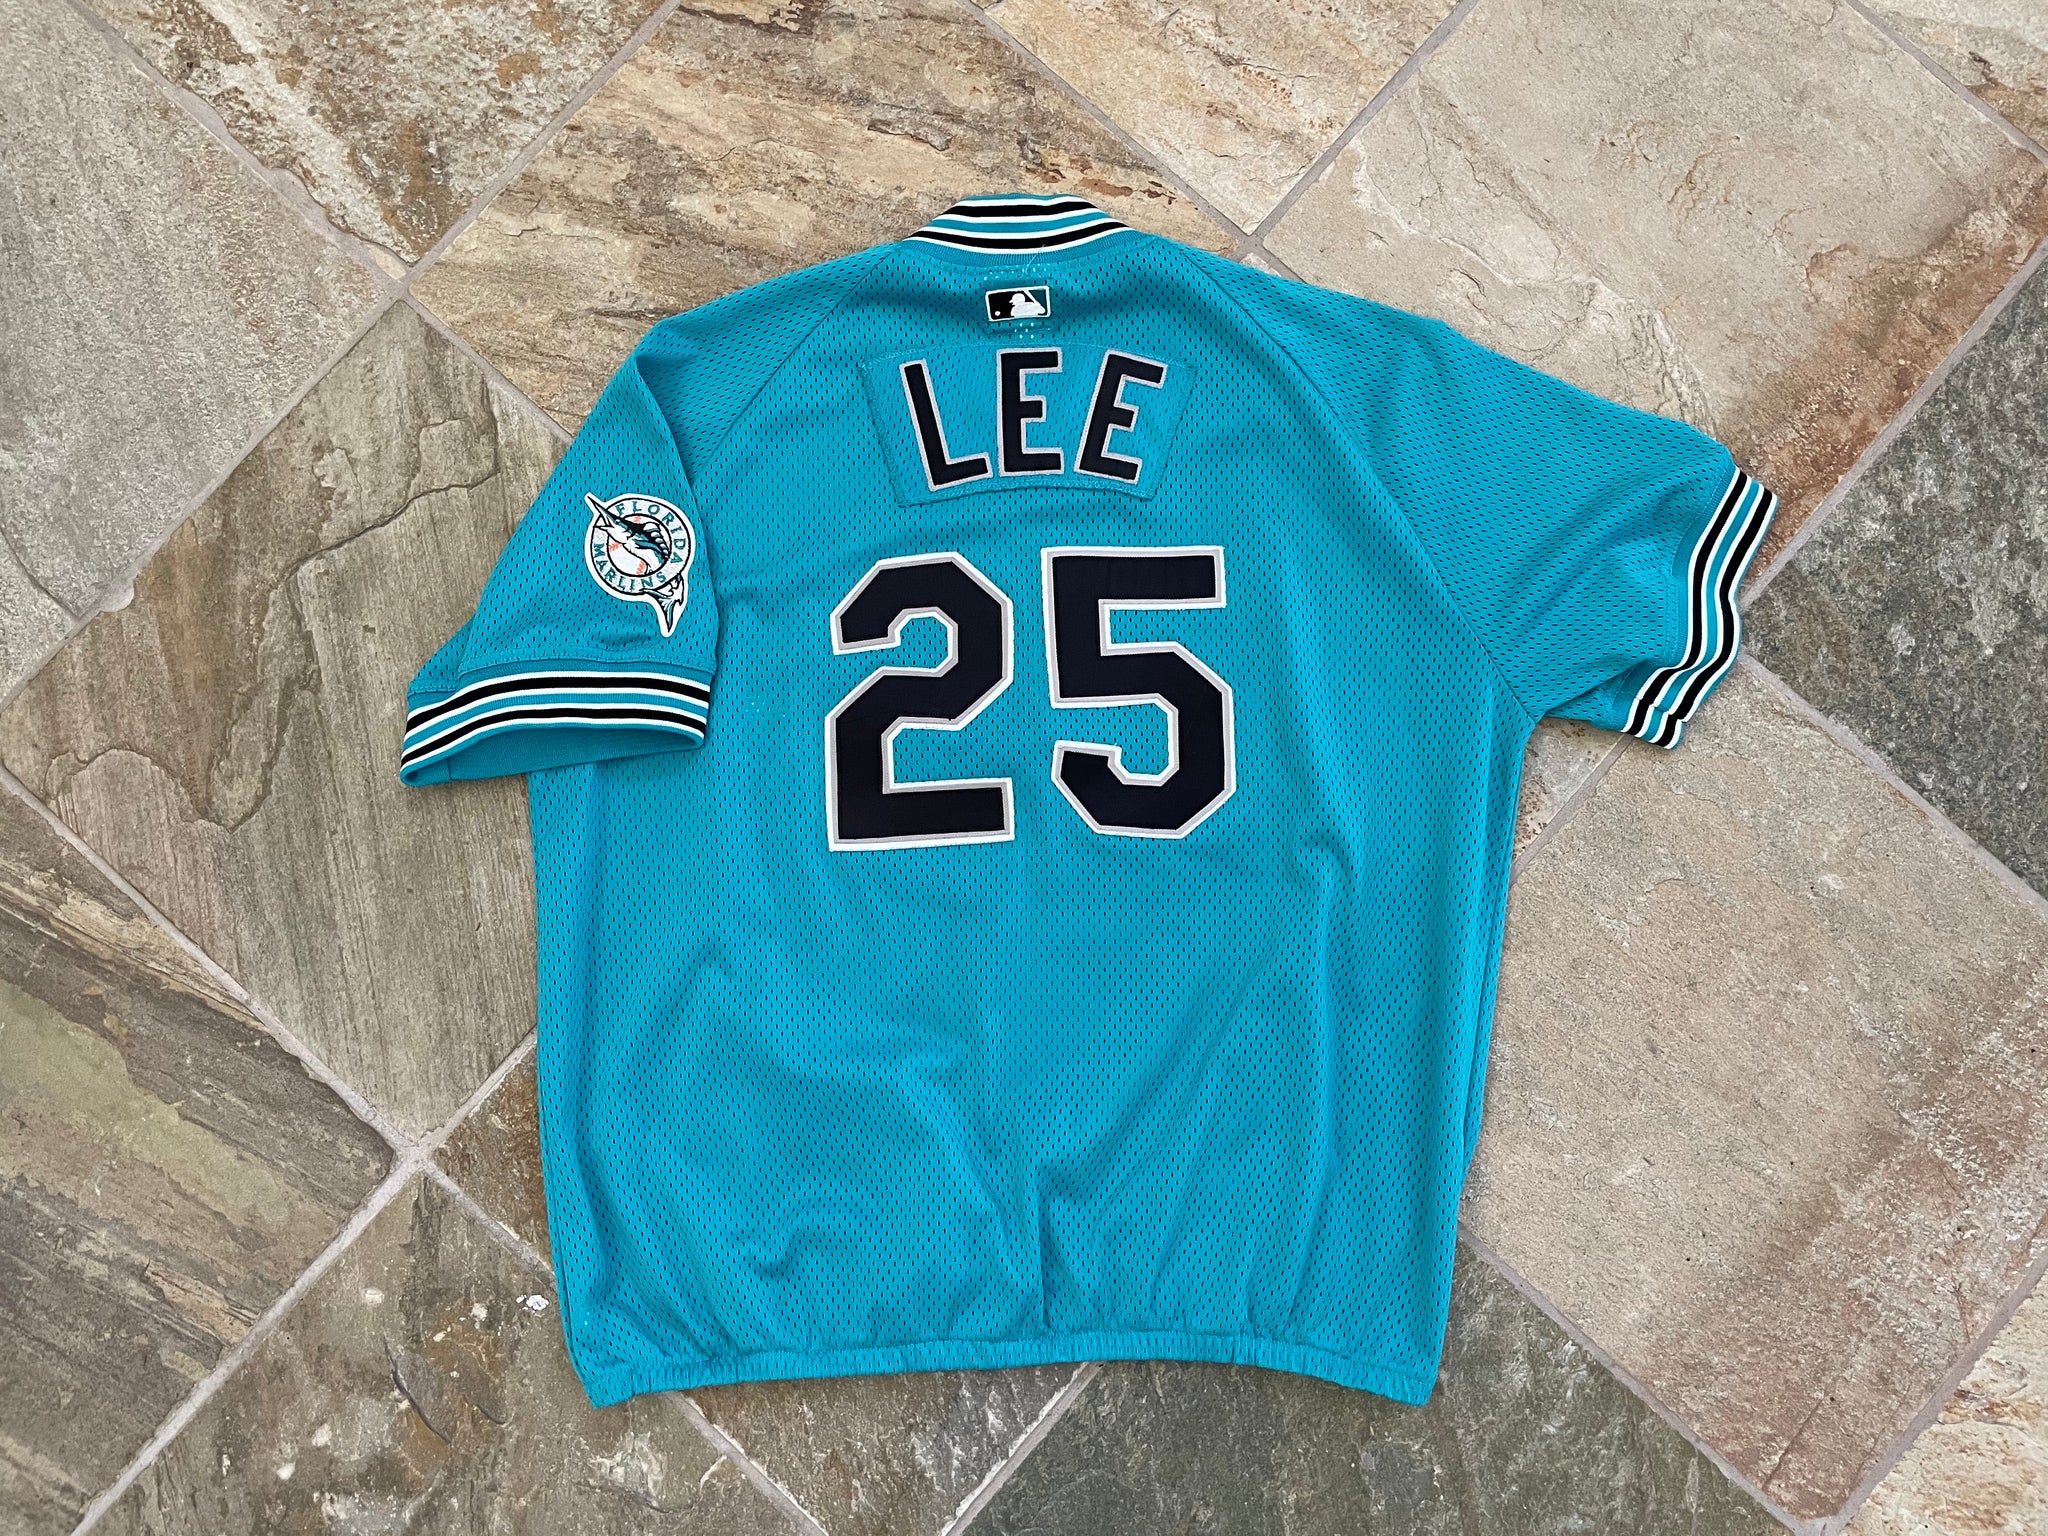 Majestic, Other, Majestic Florida Marlins Jersey